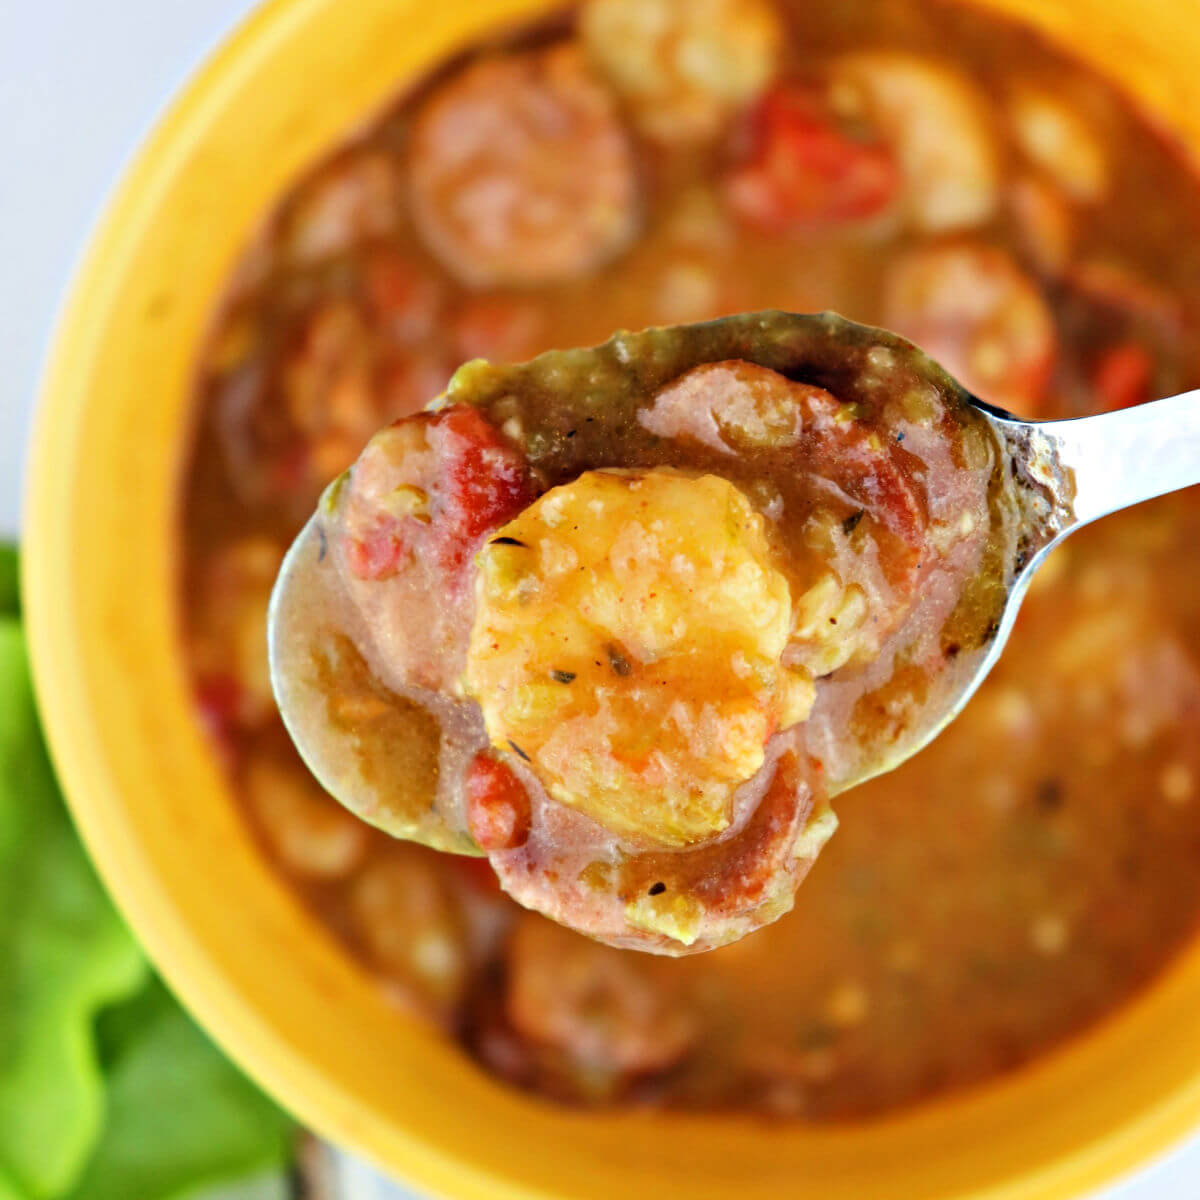 New Orleans style Keto Gumbo is gluten-free, full of spice, and style. Shrimp, andouille sausage, veggies, and more.